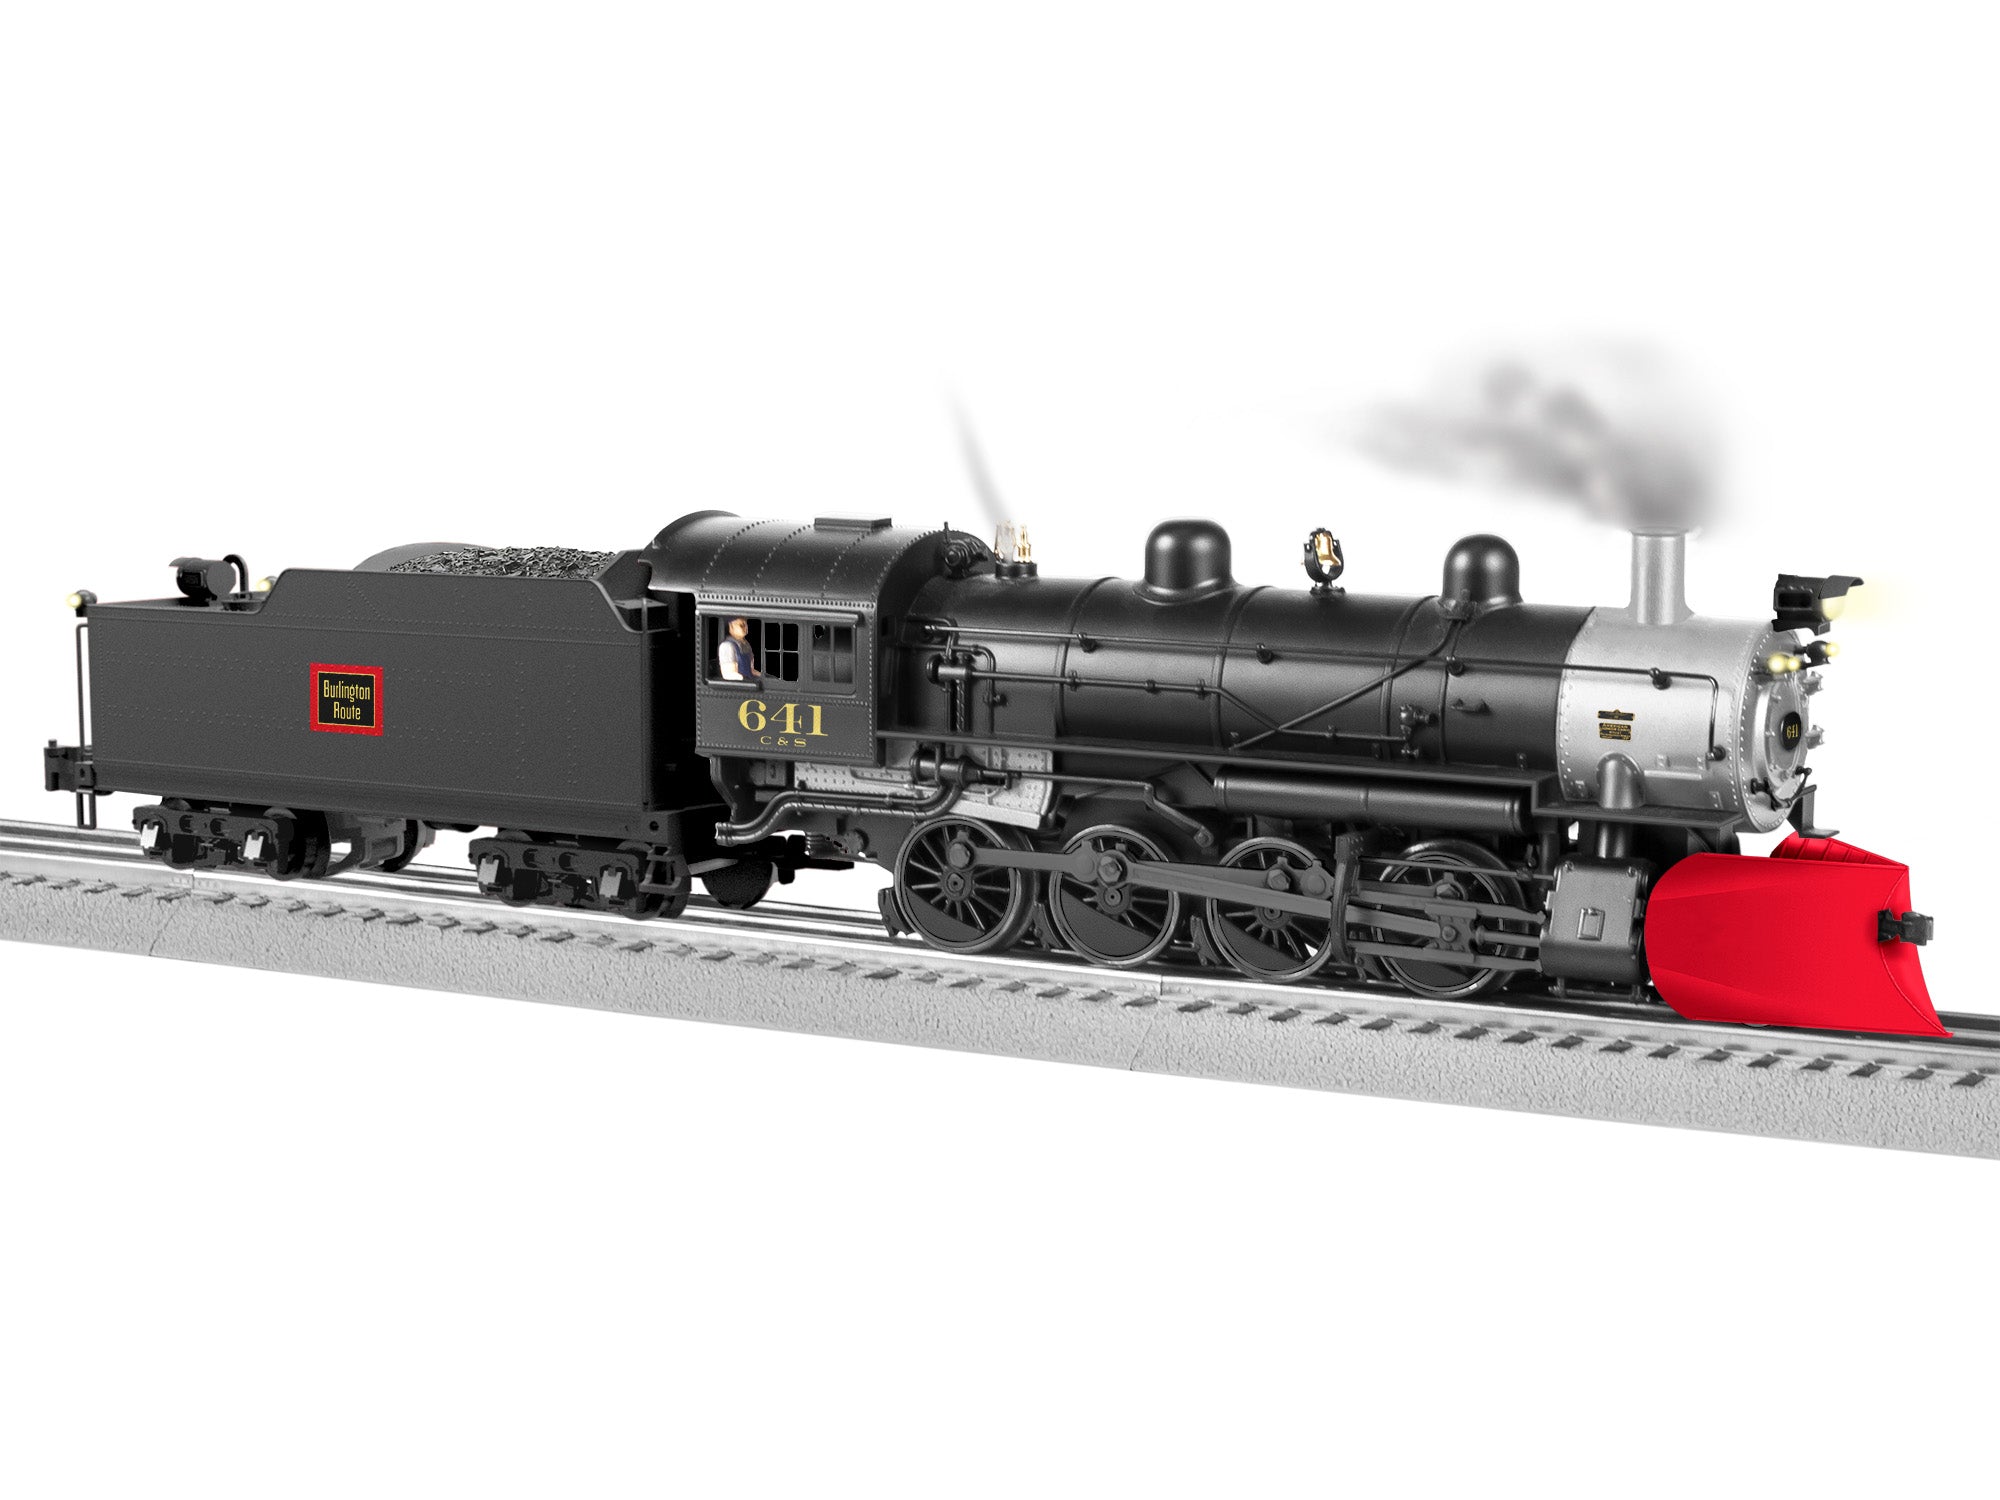 Lionel 2431350 - Legacy Consolidation Steam Engine "Colorado & Southern" #641